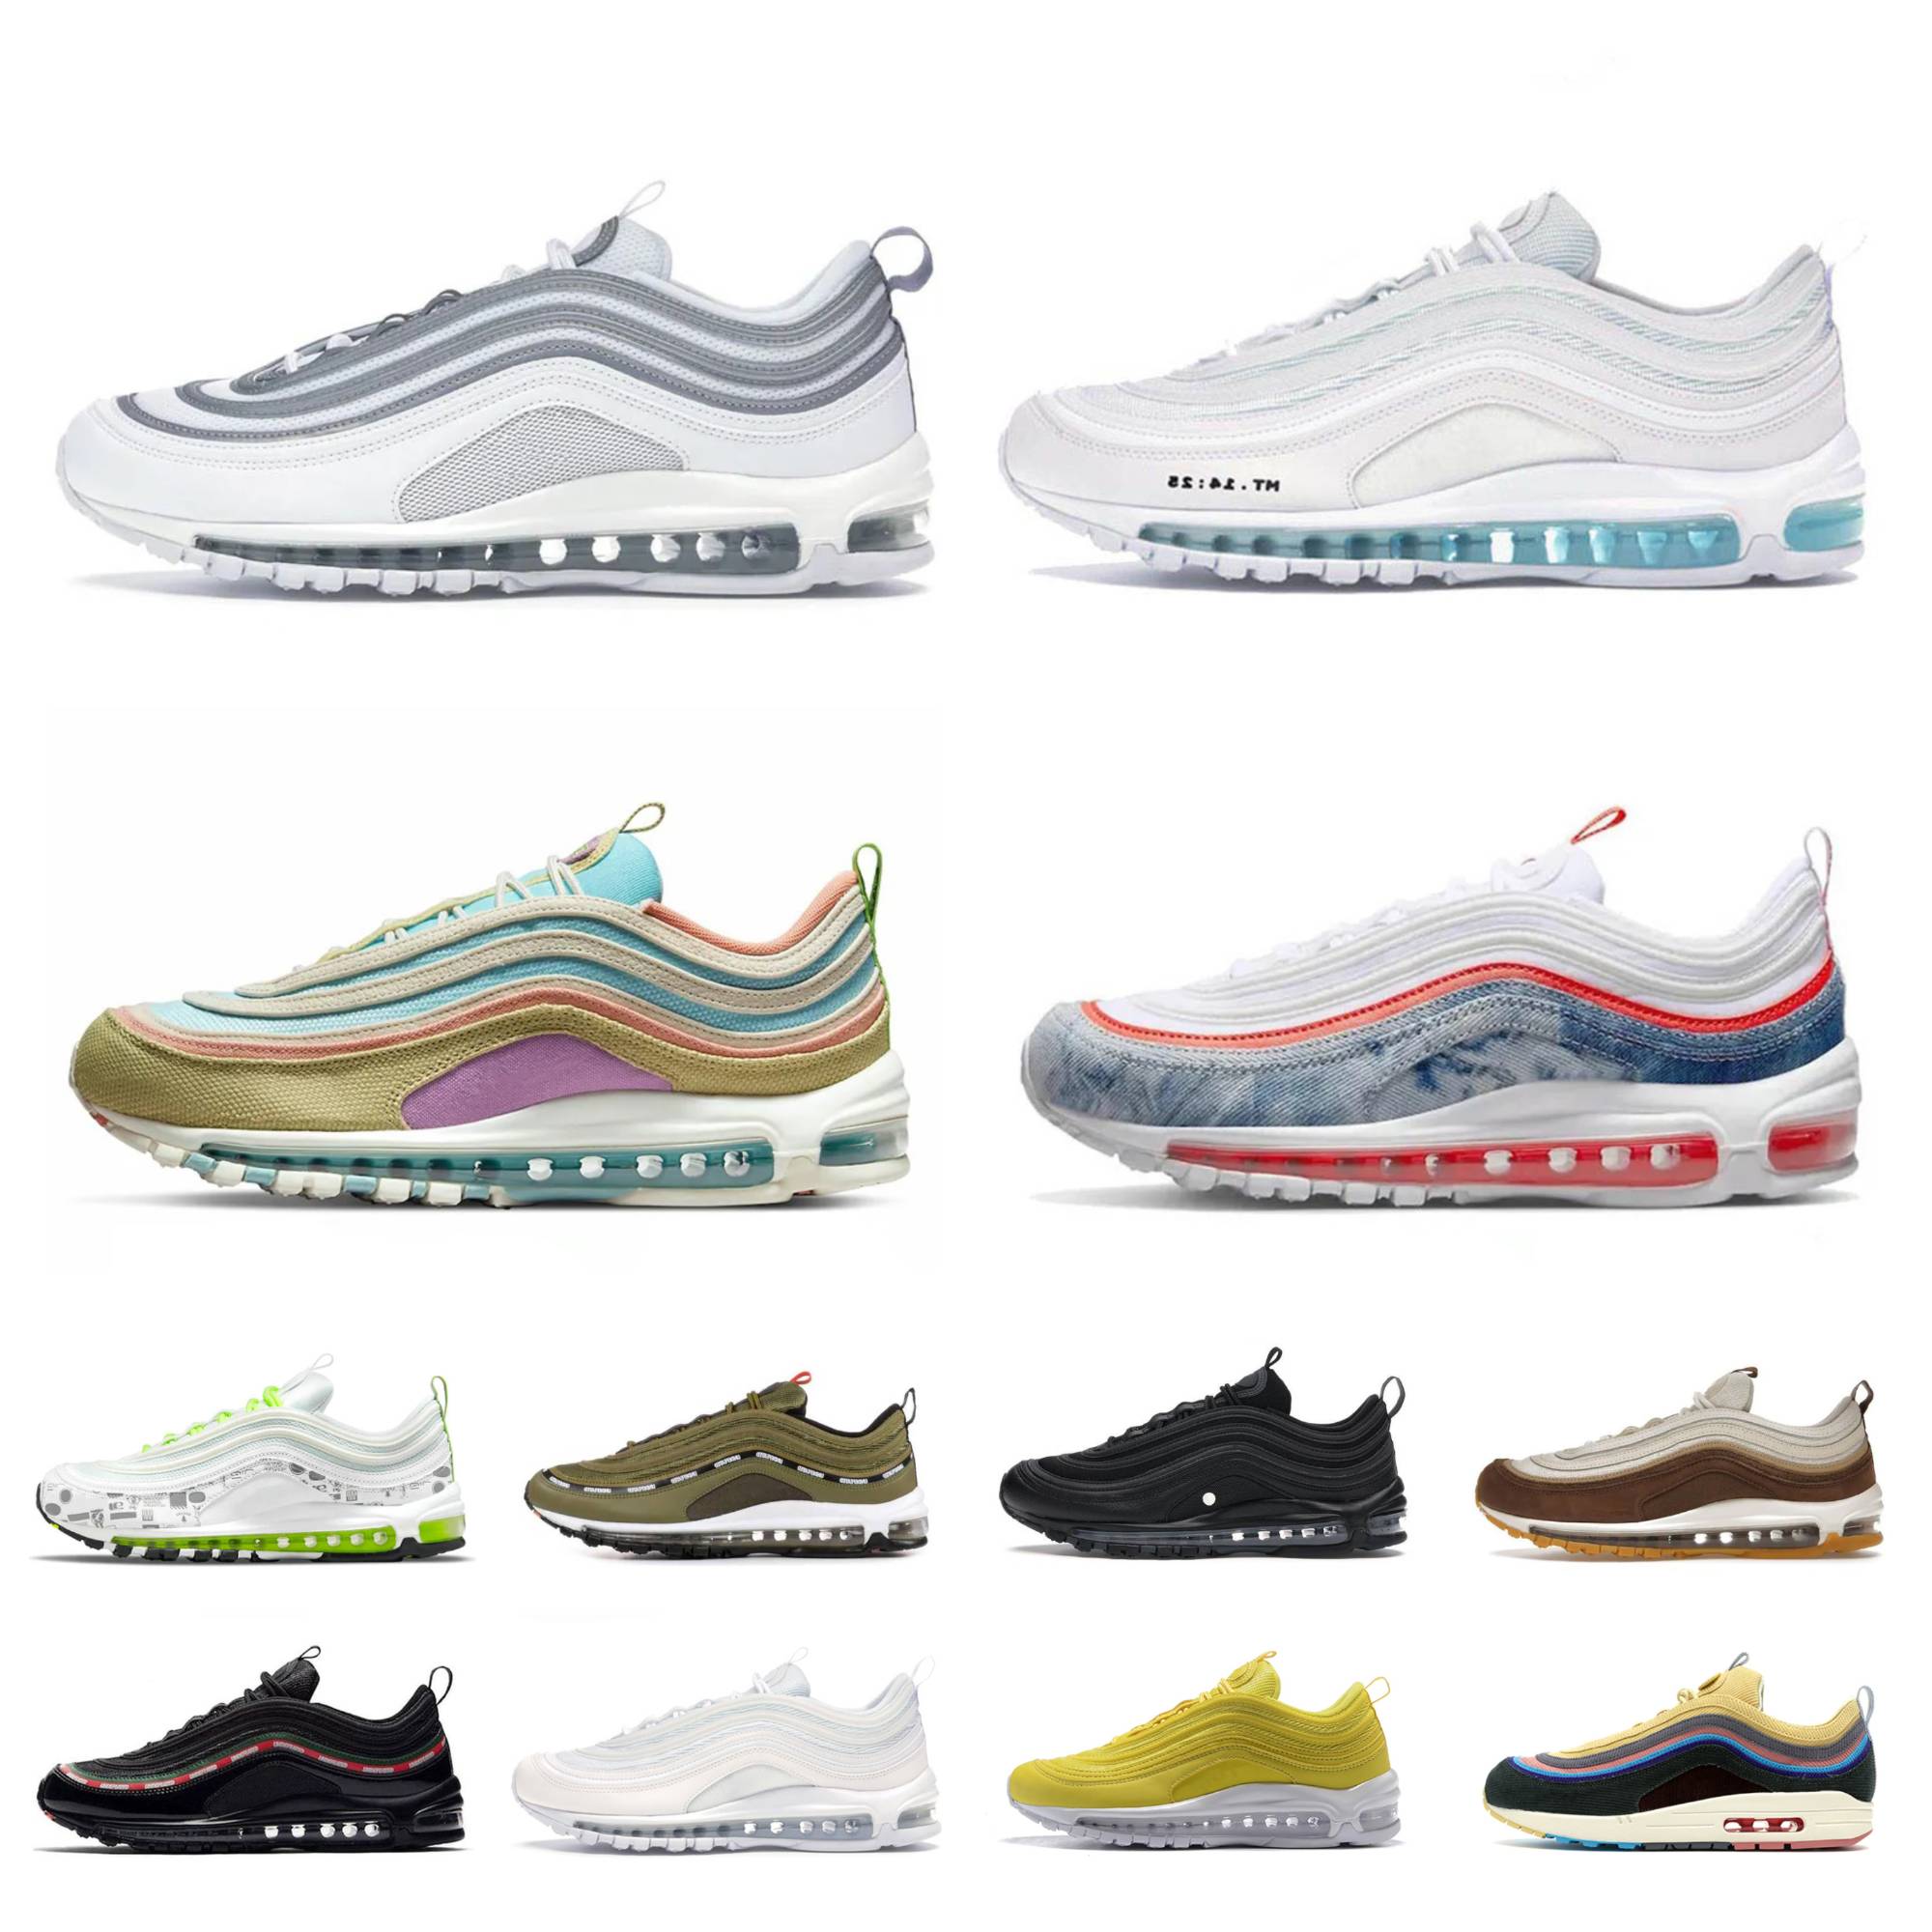 Max 97 Casual Shoes Mschf X Inri Jesus obesegrade White Summit Triple White Metalic Gold Mens Women Designer Air 97S Sean Wotherspoon Sliver Bullet Trainers Sneakers